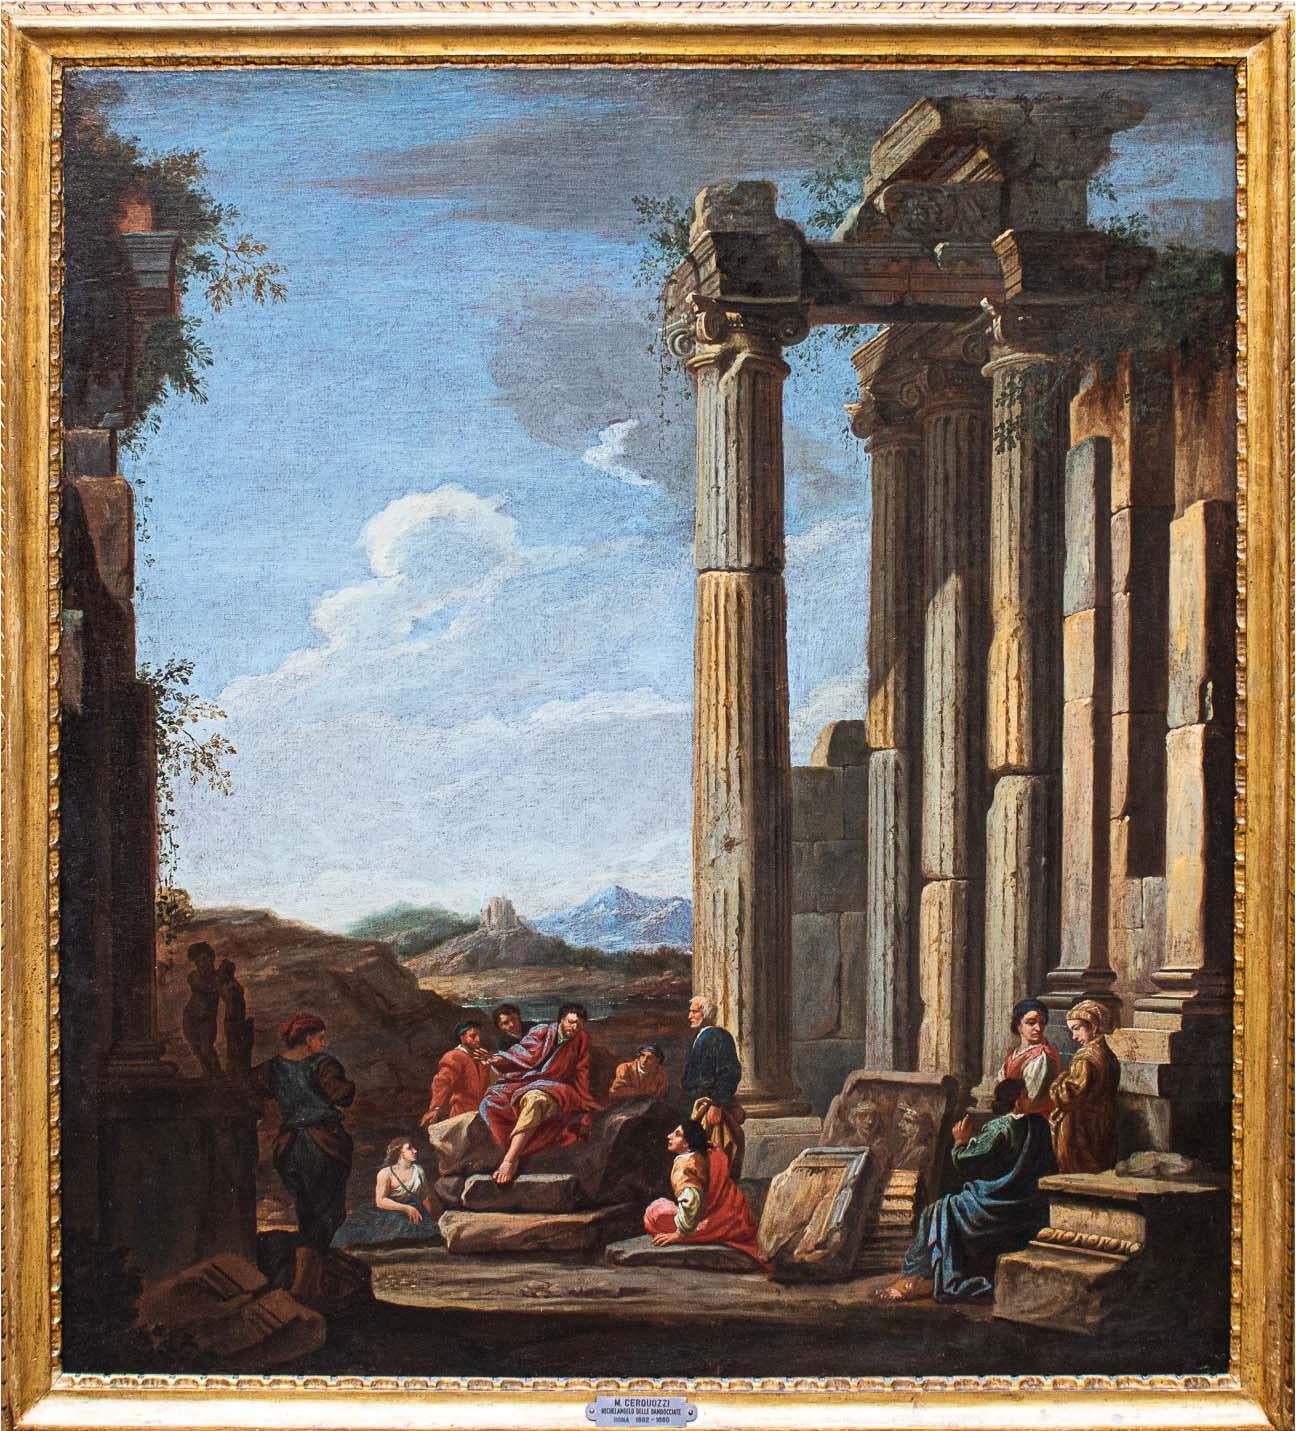 Oiled Domenico Roberti '1642-1707' Whims with Classical Ruins Paintings Oil on Canvas 